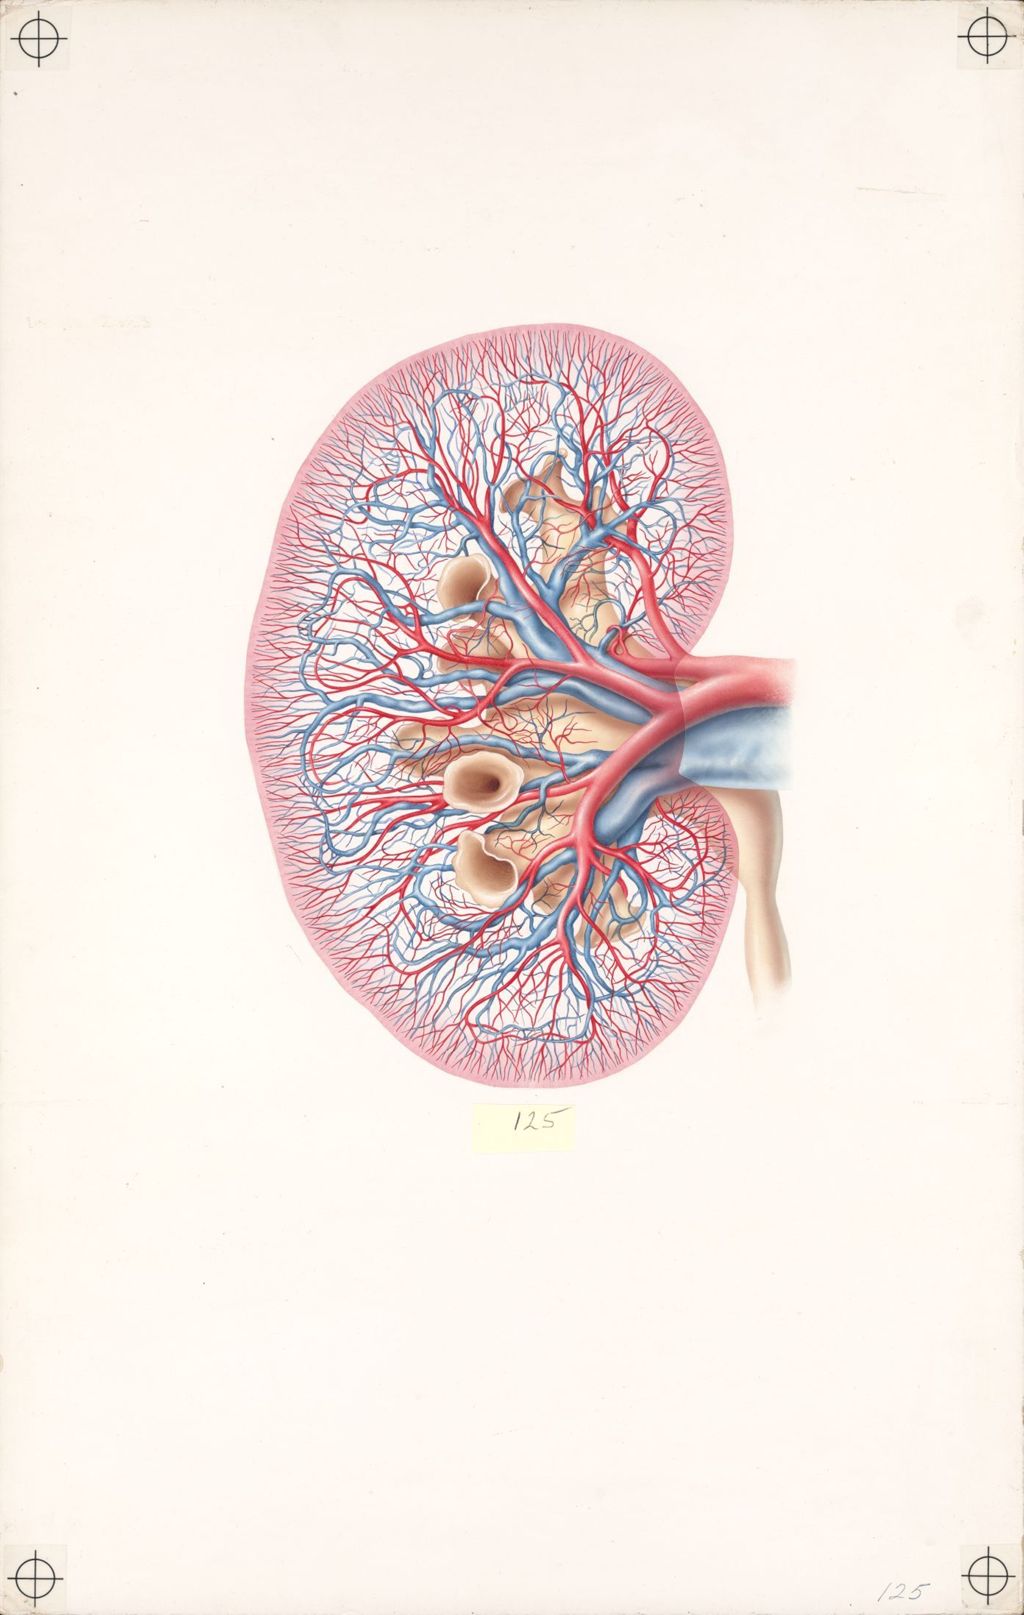 Miniature of Doctor-Patient Explanatory Atlas of Anatomy, Anatomical Relationships of the Kidneys and Adjacent Organs, Plate II